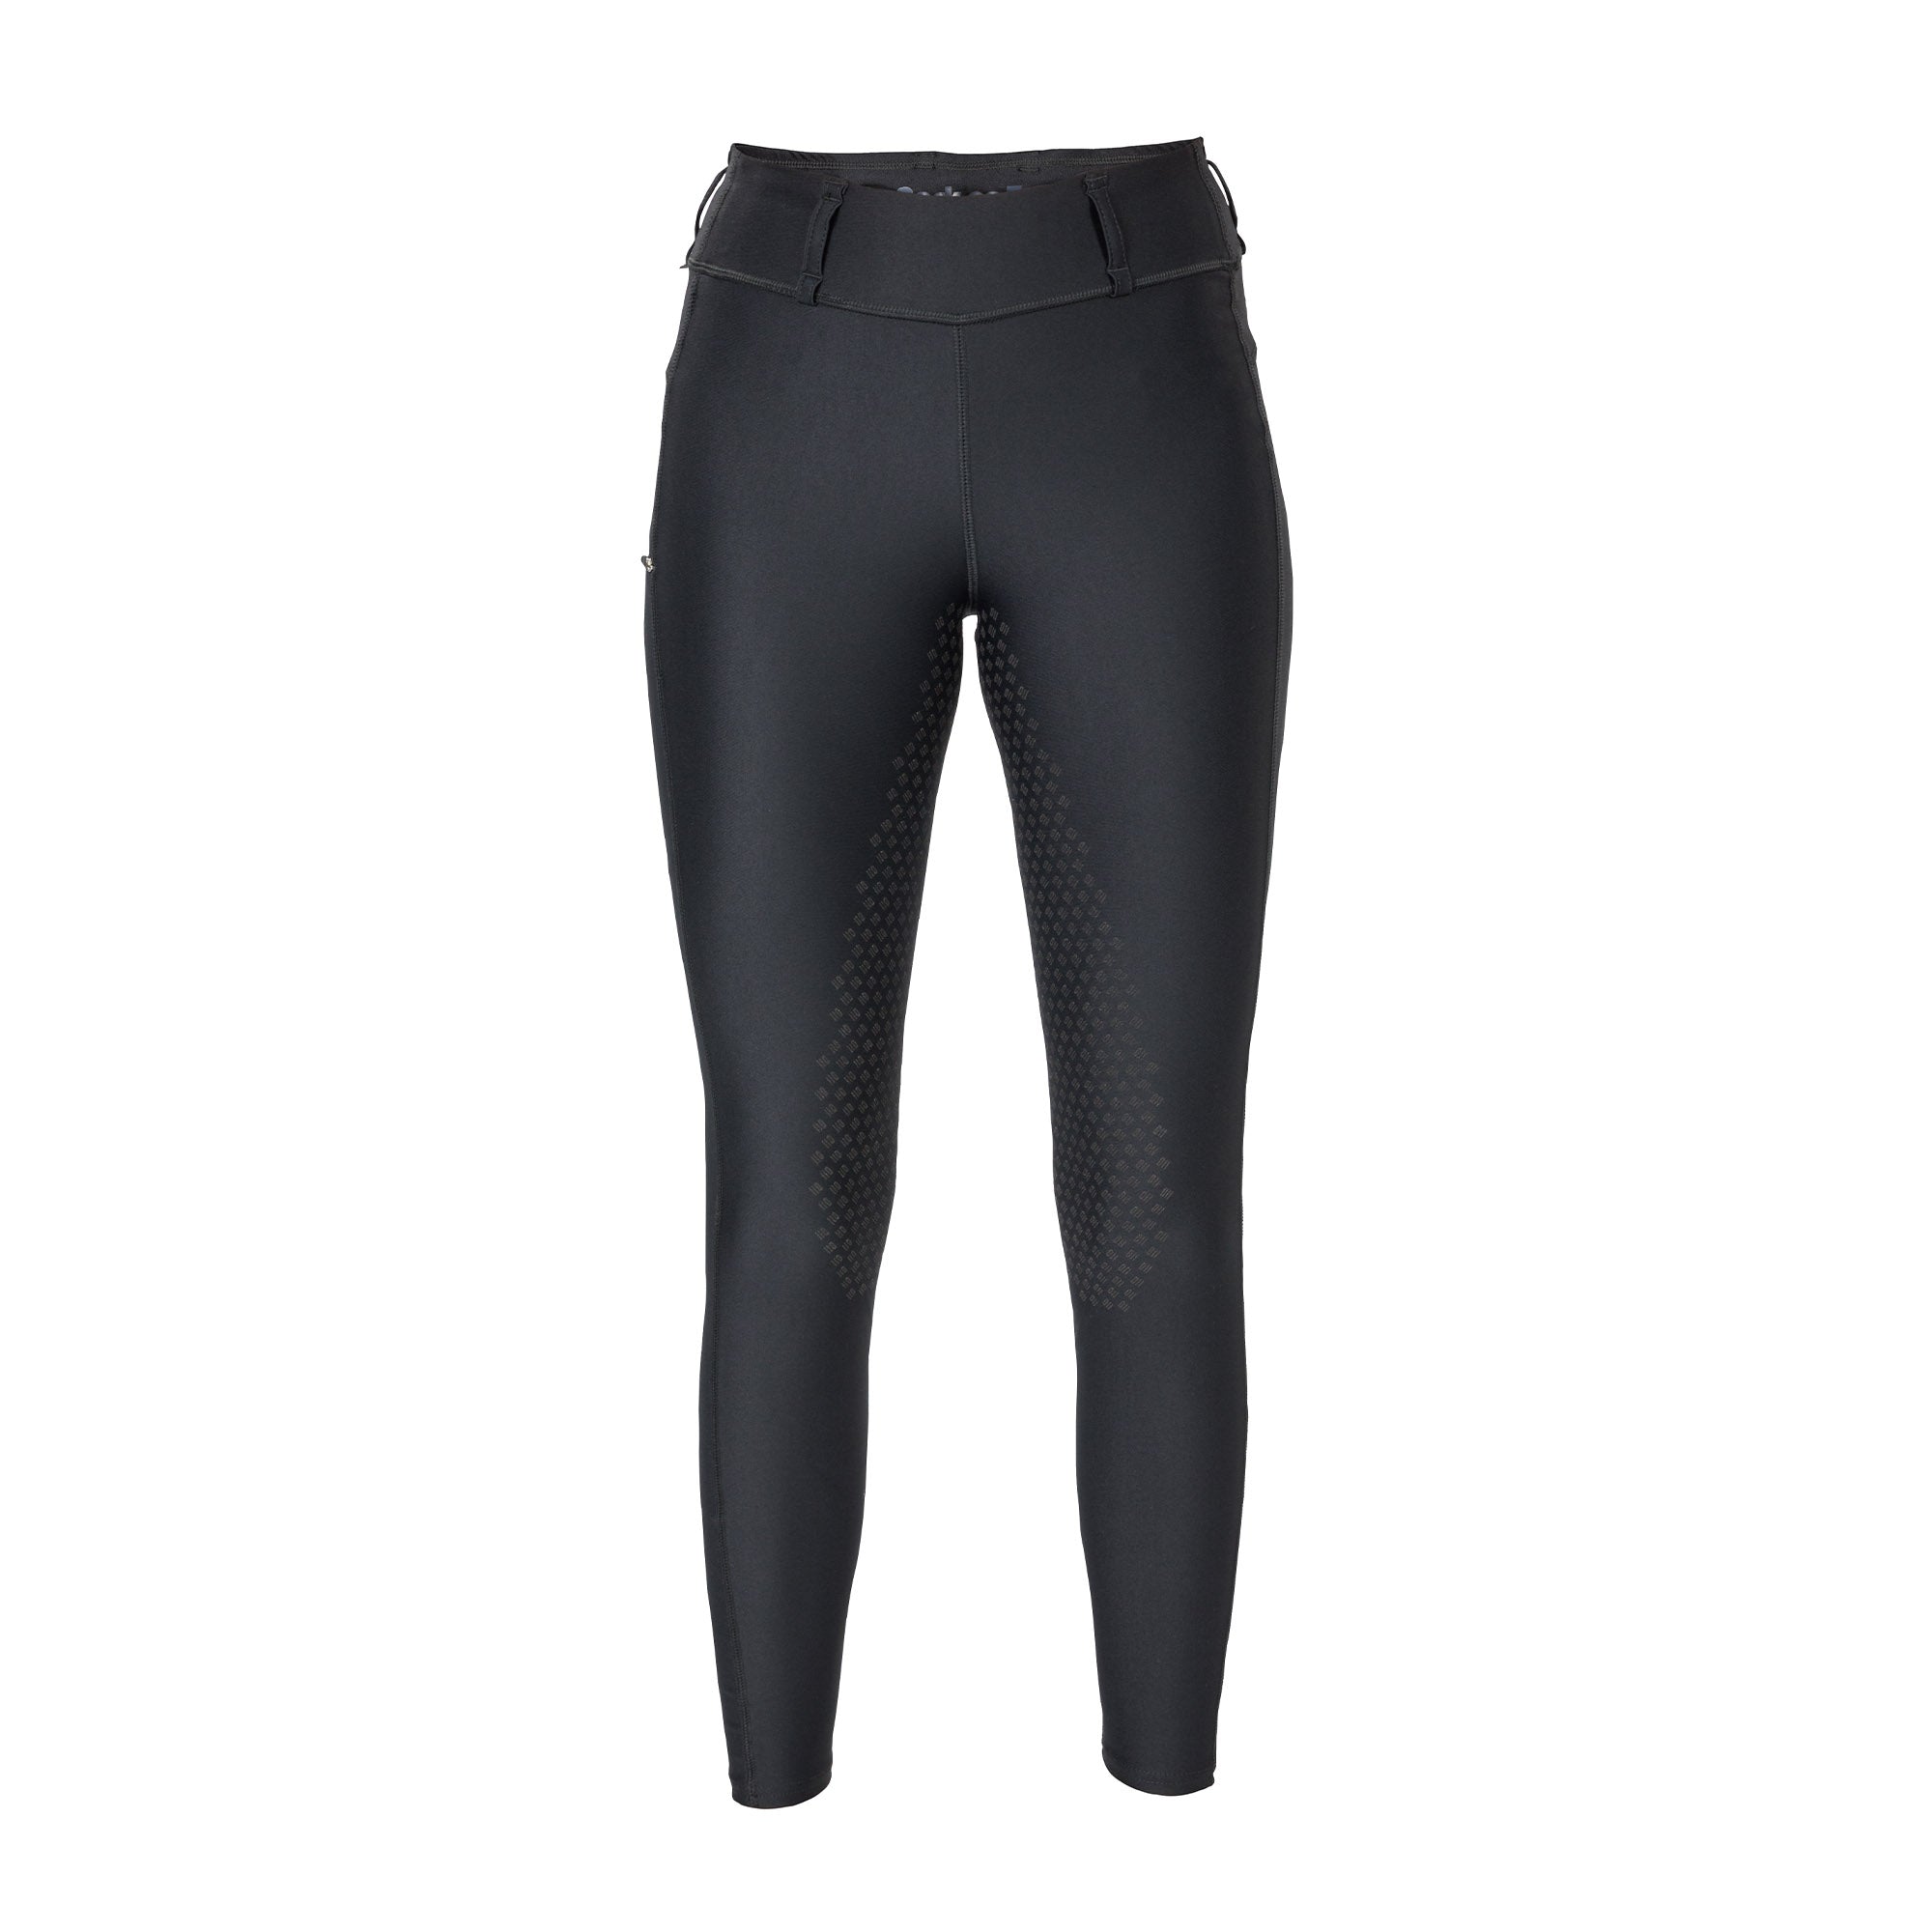 Carmen Riding Tights, Full Seat / Knee Patch Breeches